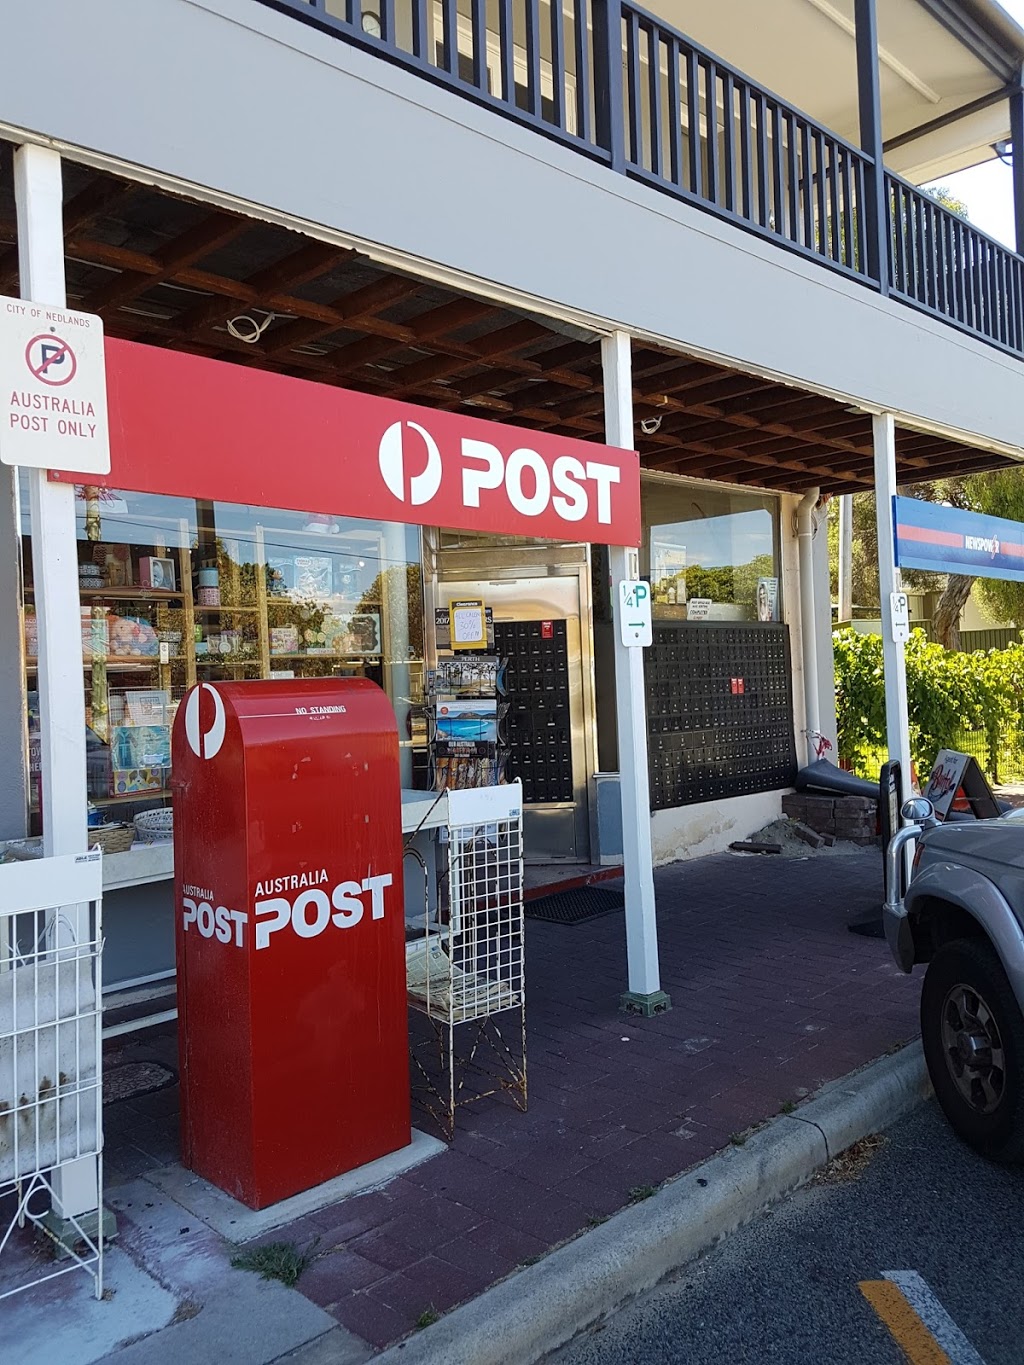 Mount Claremont Post News and Gift (10/29 Strickland St) Opening Hours